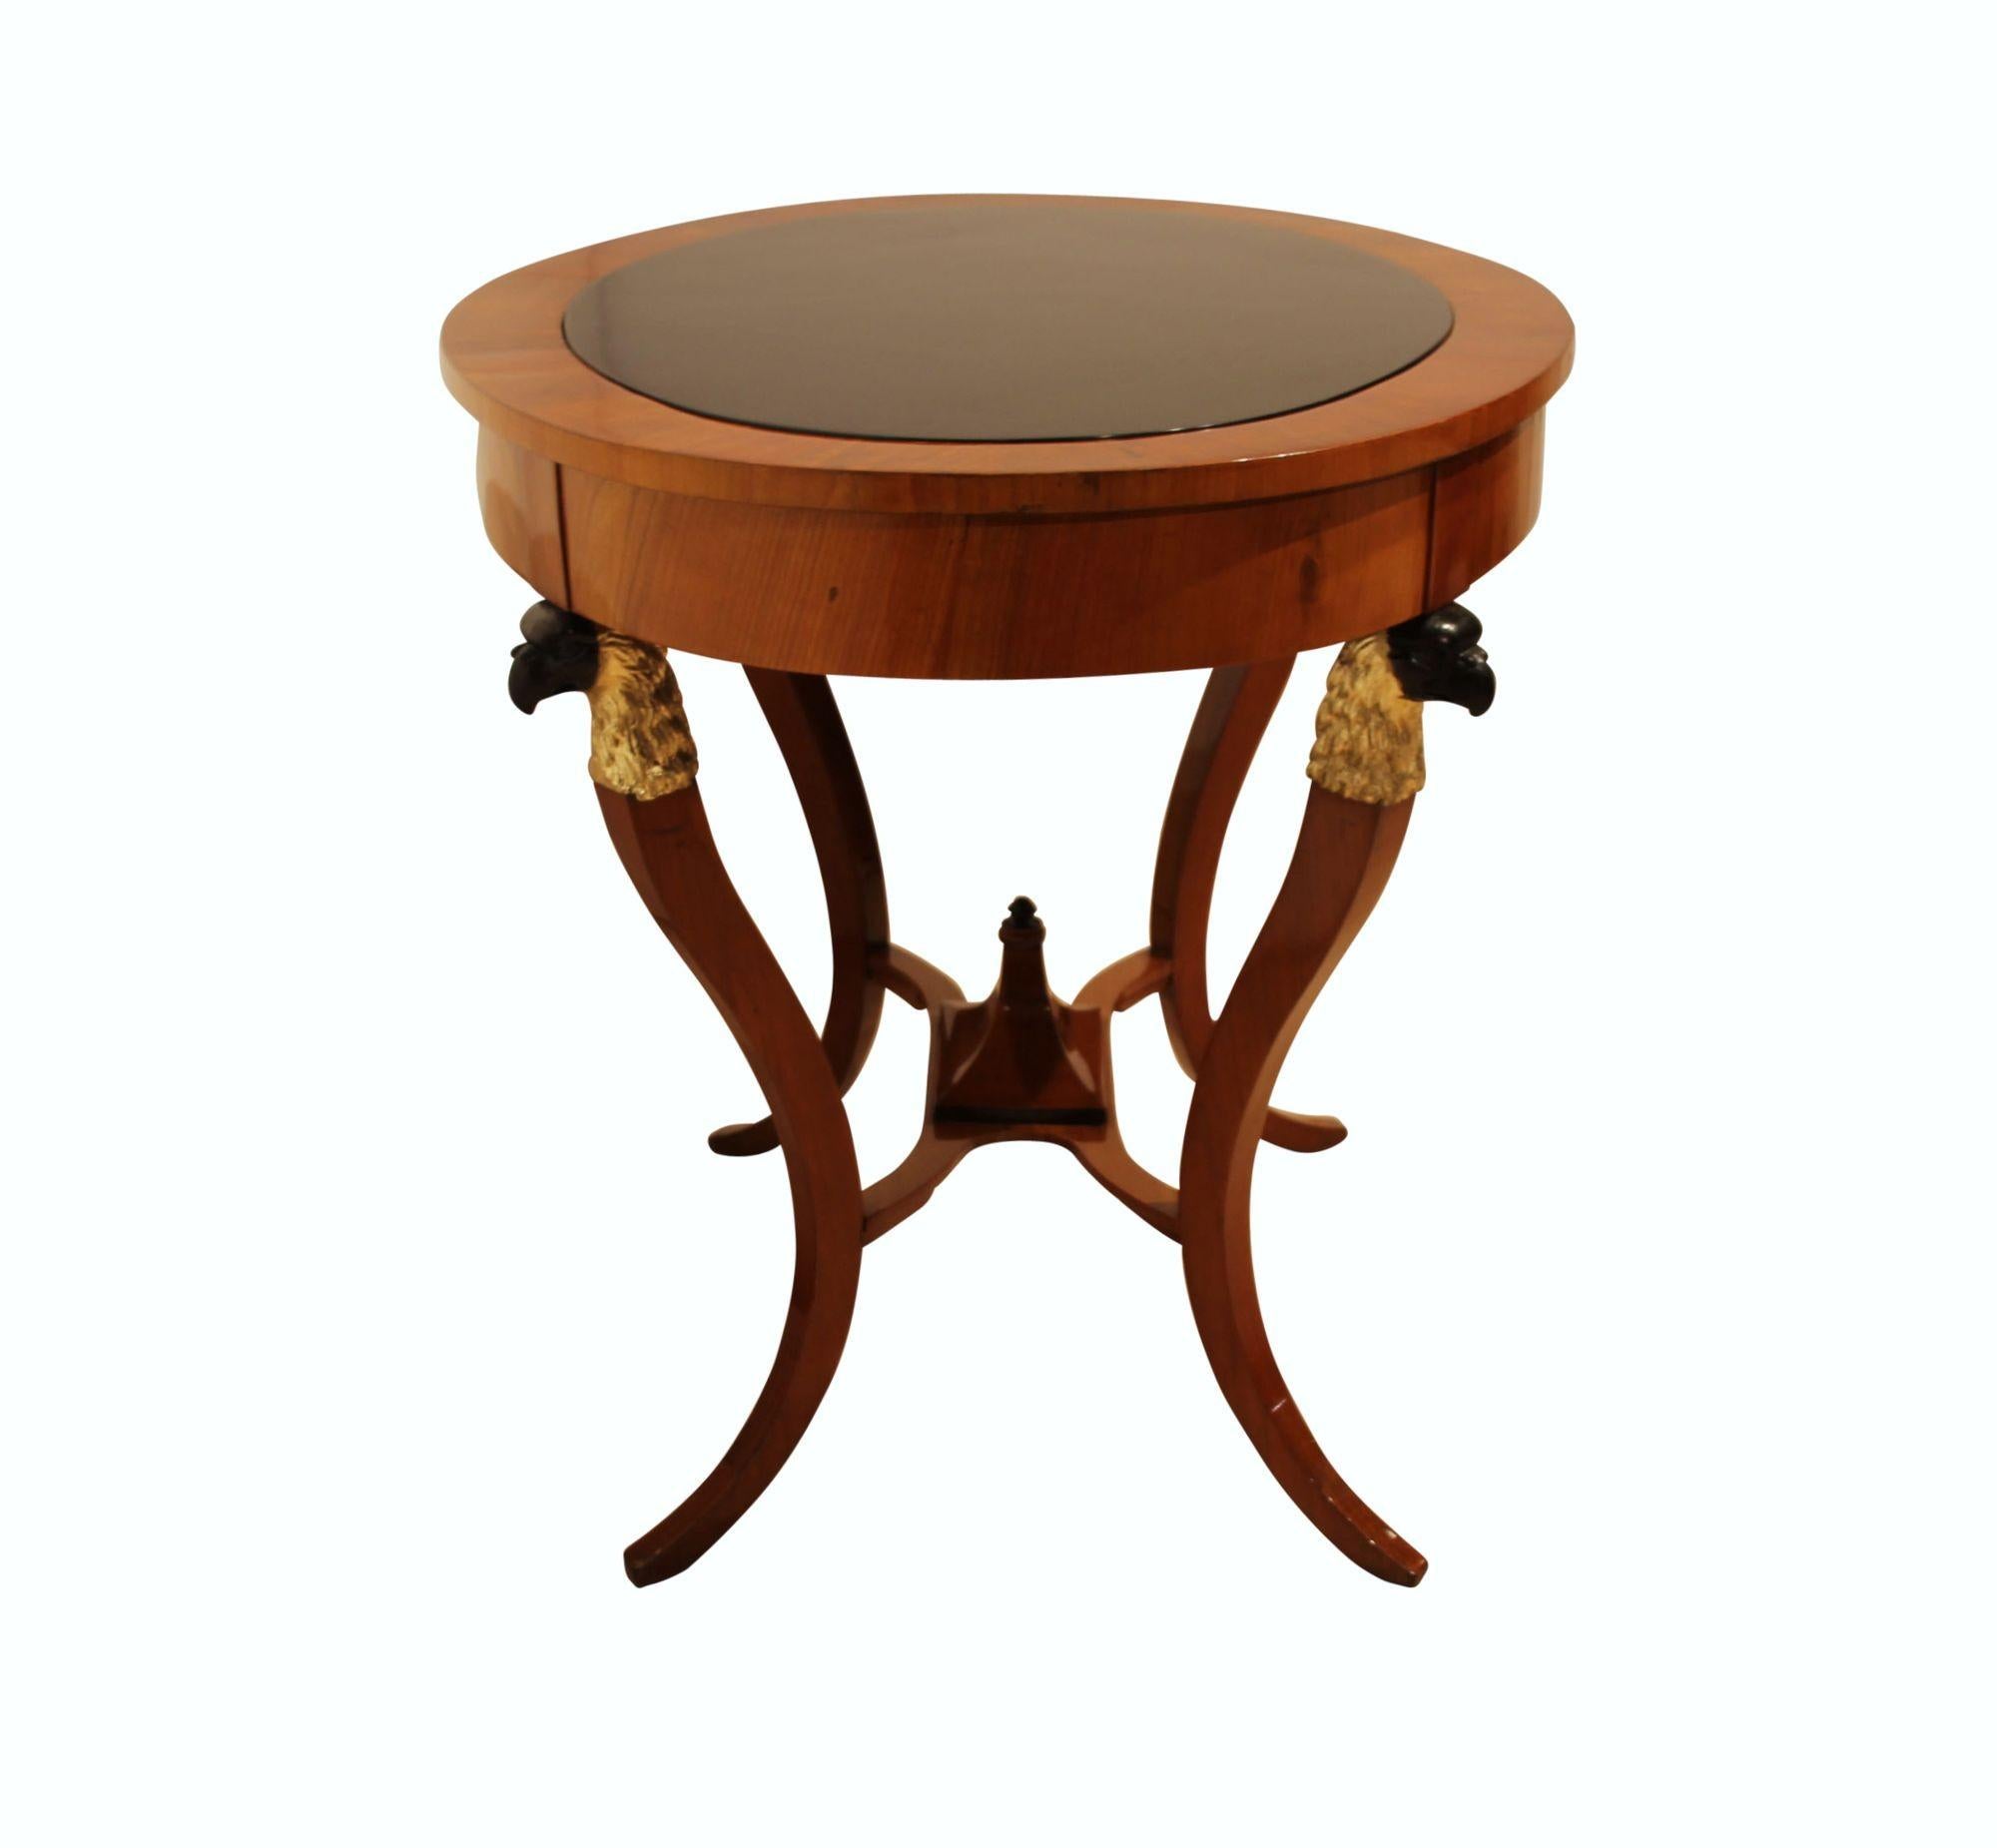 Oval, early Biedermeier / Empire Saloon or Center Table from Vienna, Austria around 1820.
Cherry veneered and solid wood. Intermediate tableau with upward tapering partly ebonized and painted decor.
Four carved eagle heads on the sides, re-gilded